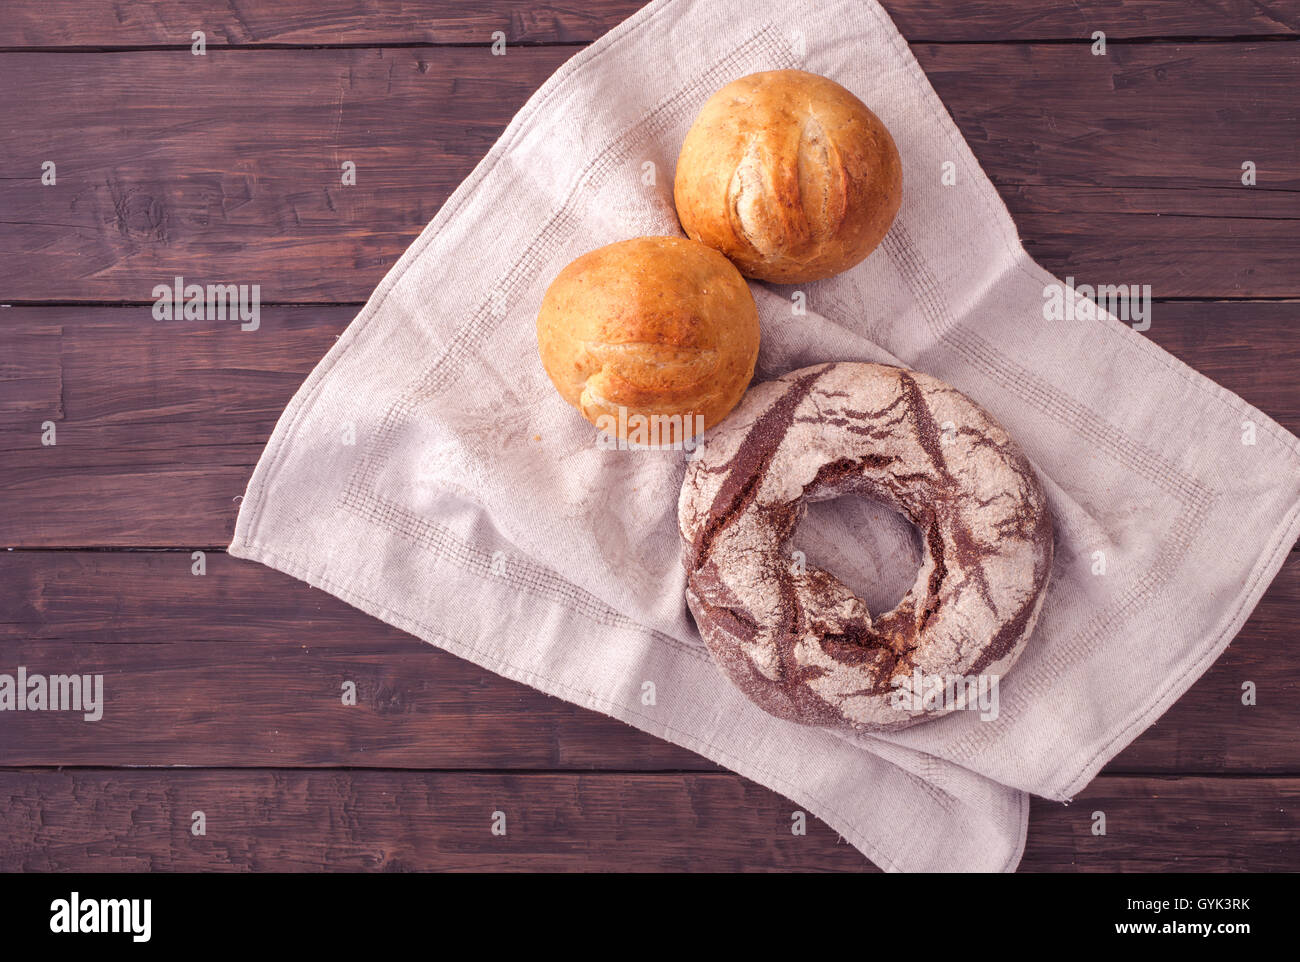 Rye bagel bread and buns Stock Photo